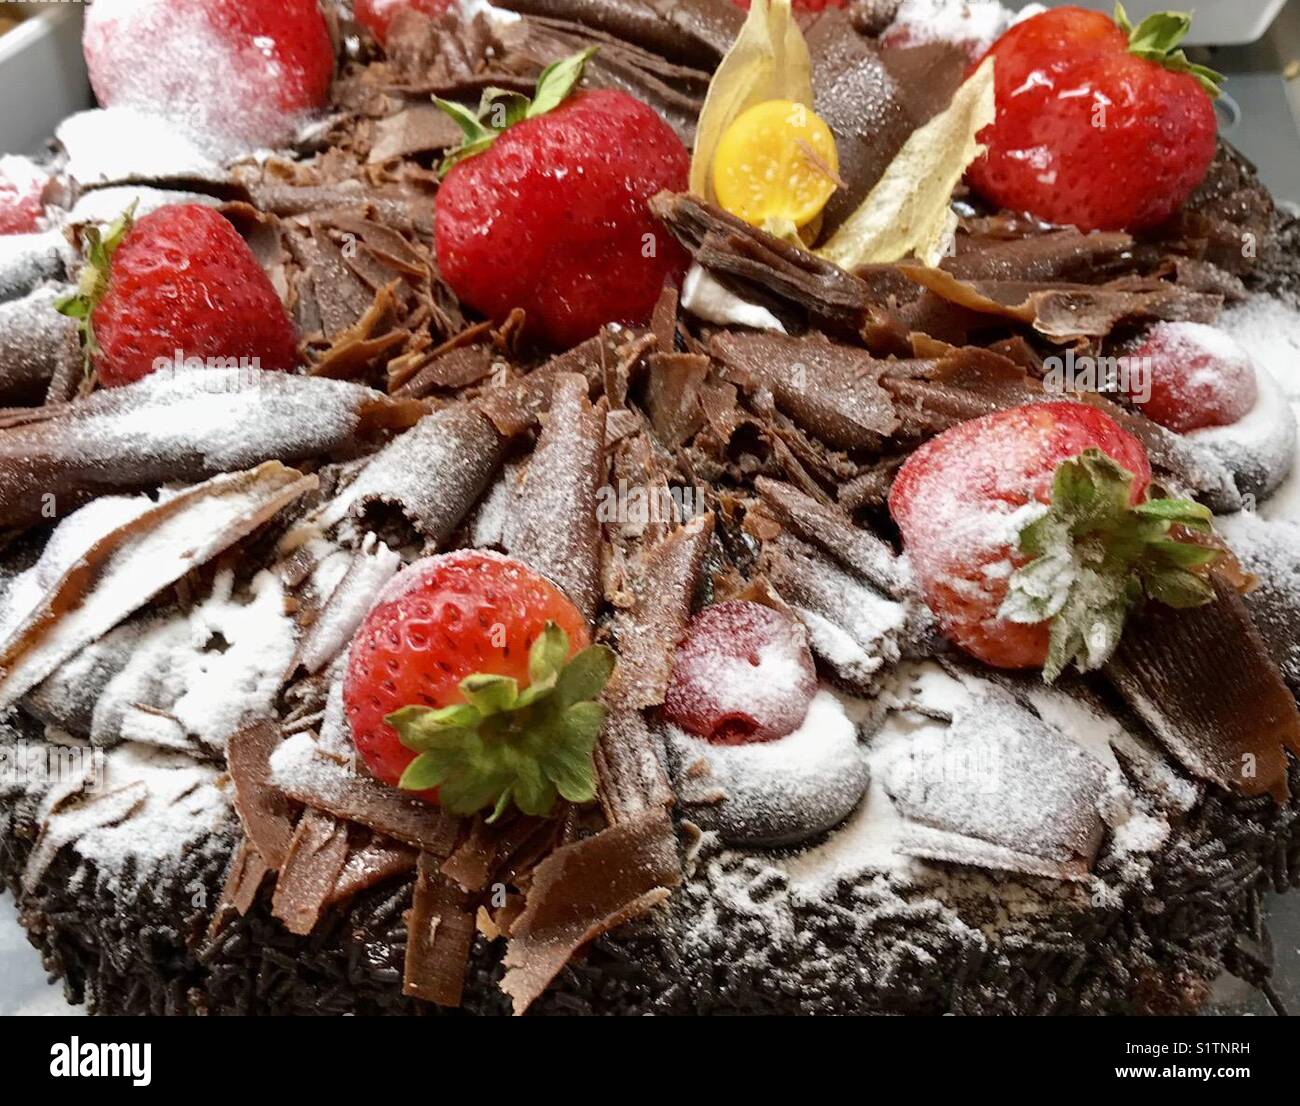 Chocolate, strawberries and icing sugar on top of a large gateau Stock Photo